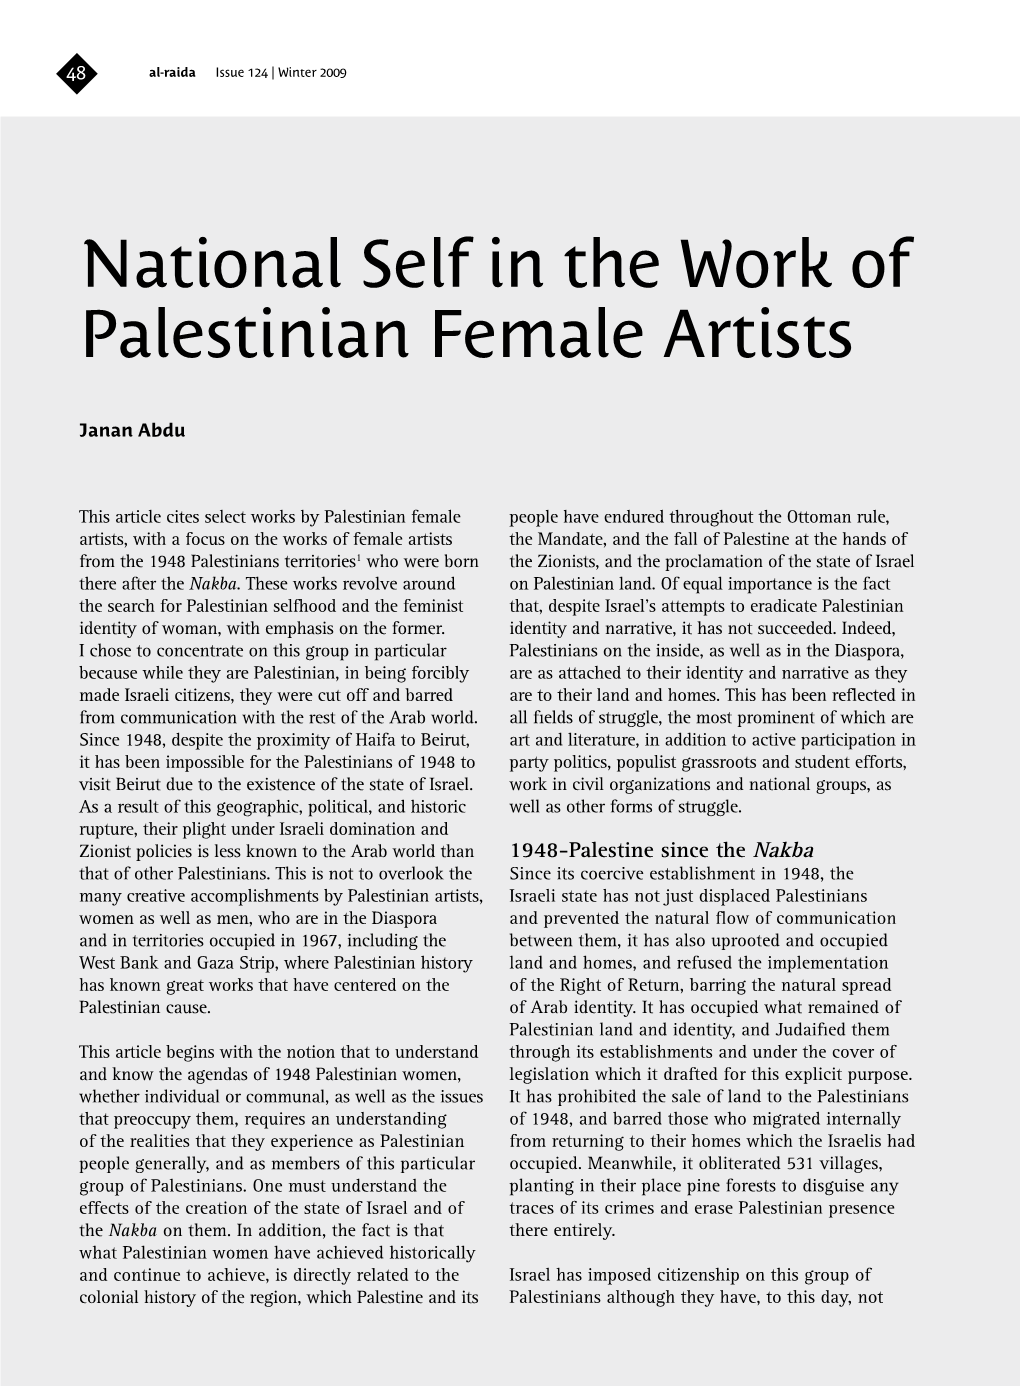 National Self in the Work of Palestinian Female Artists